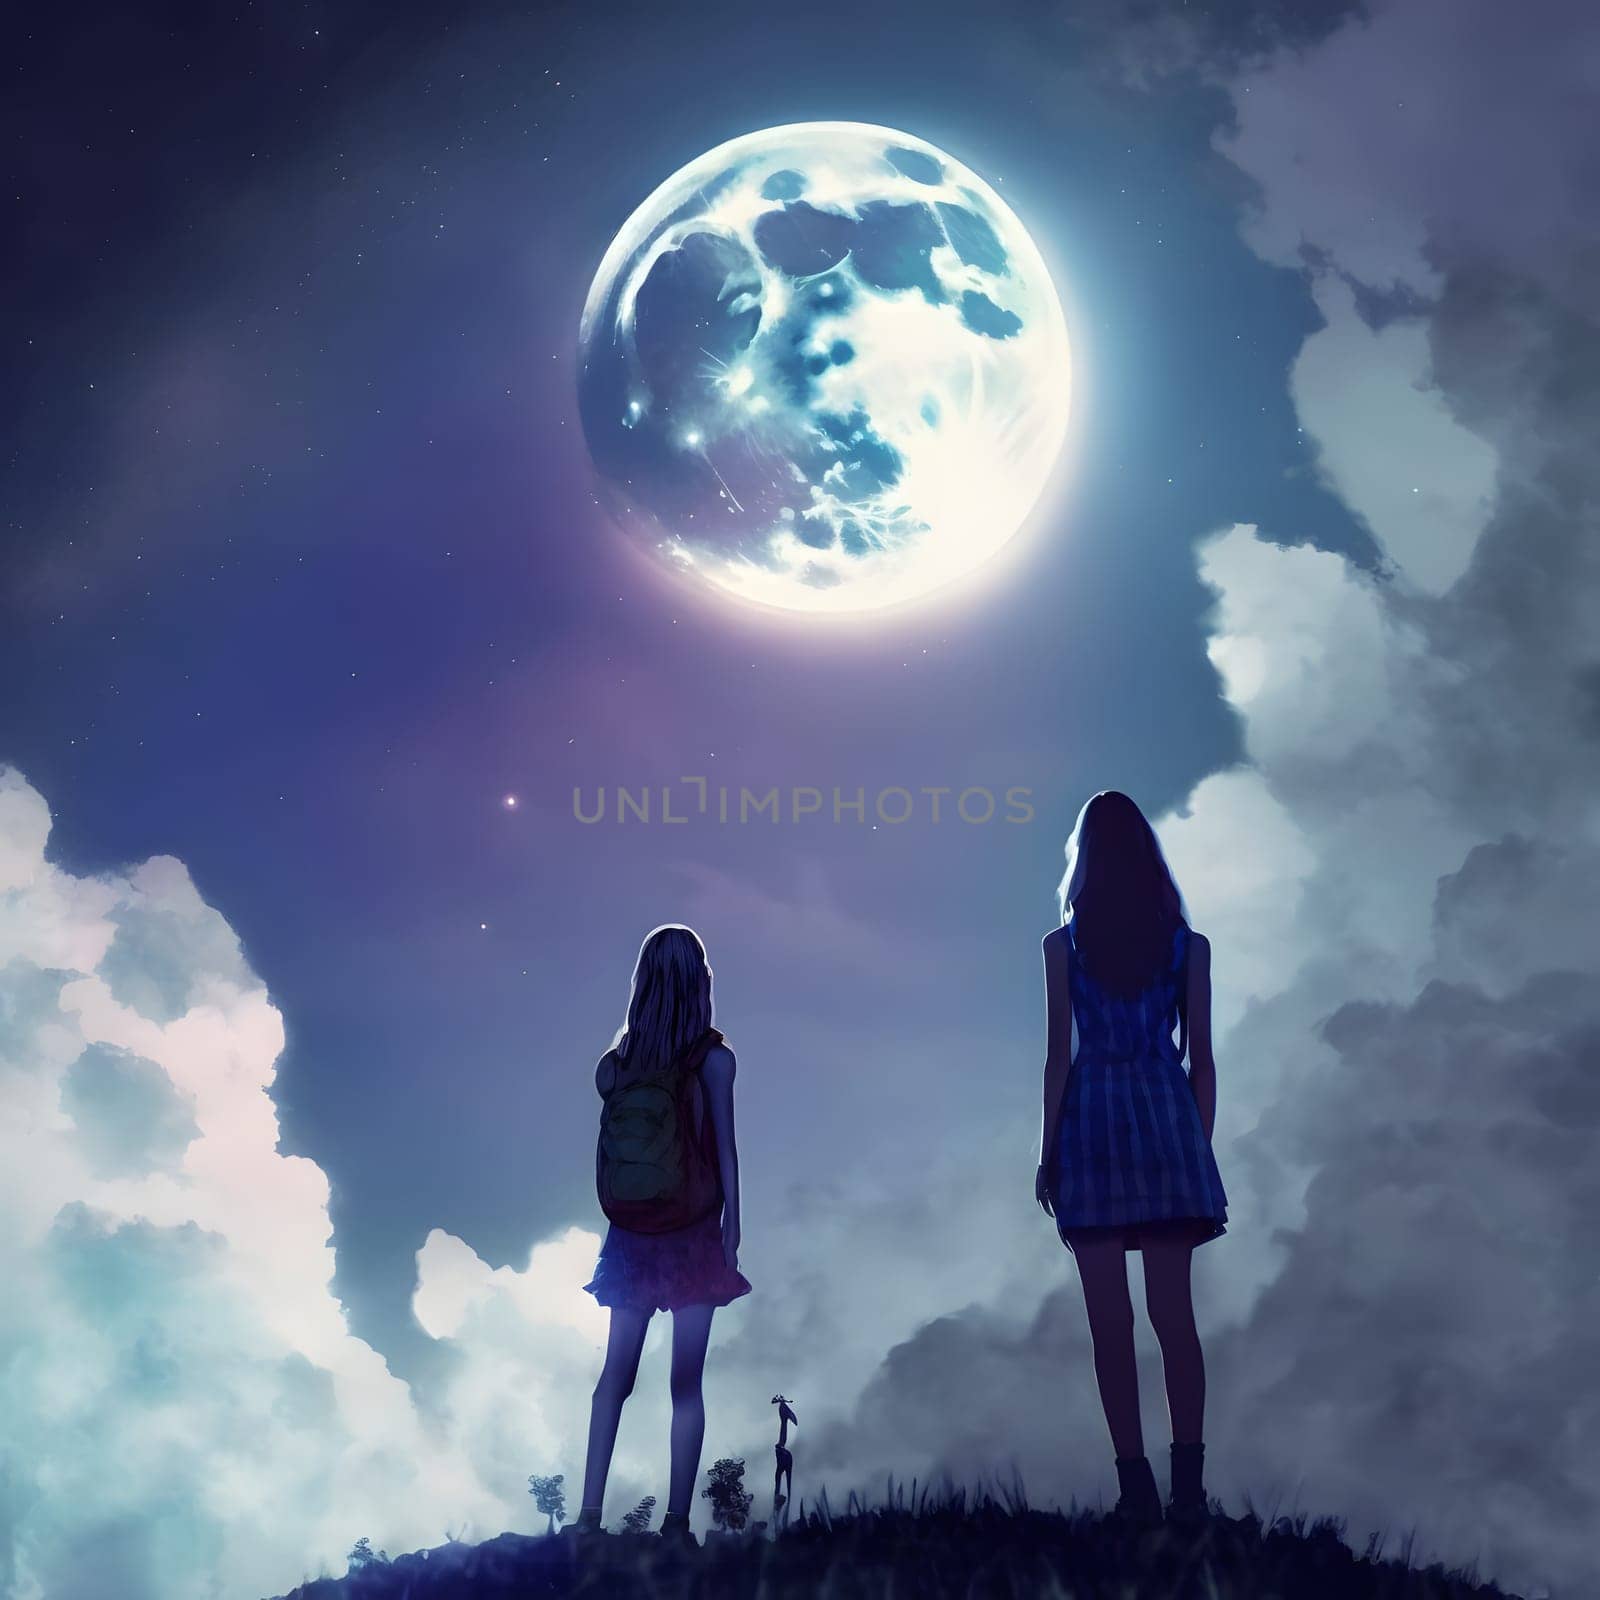 two girls looking up at the Moon in night sky, neural network generated art by z1b